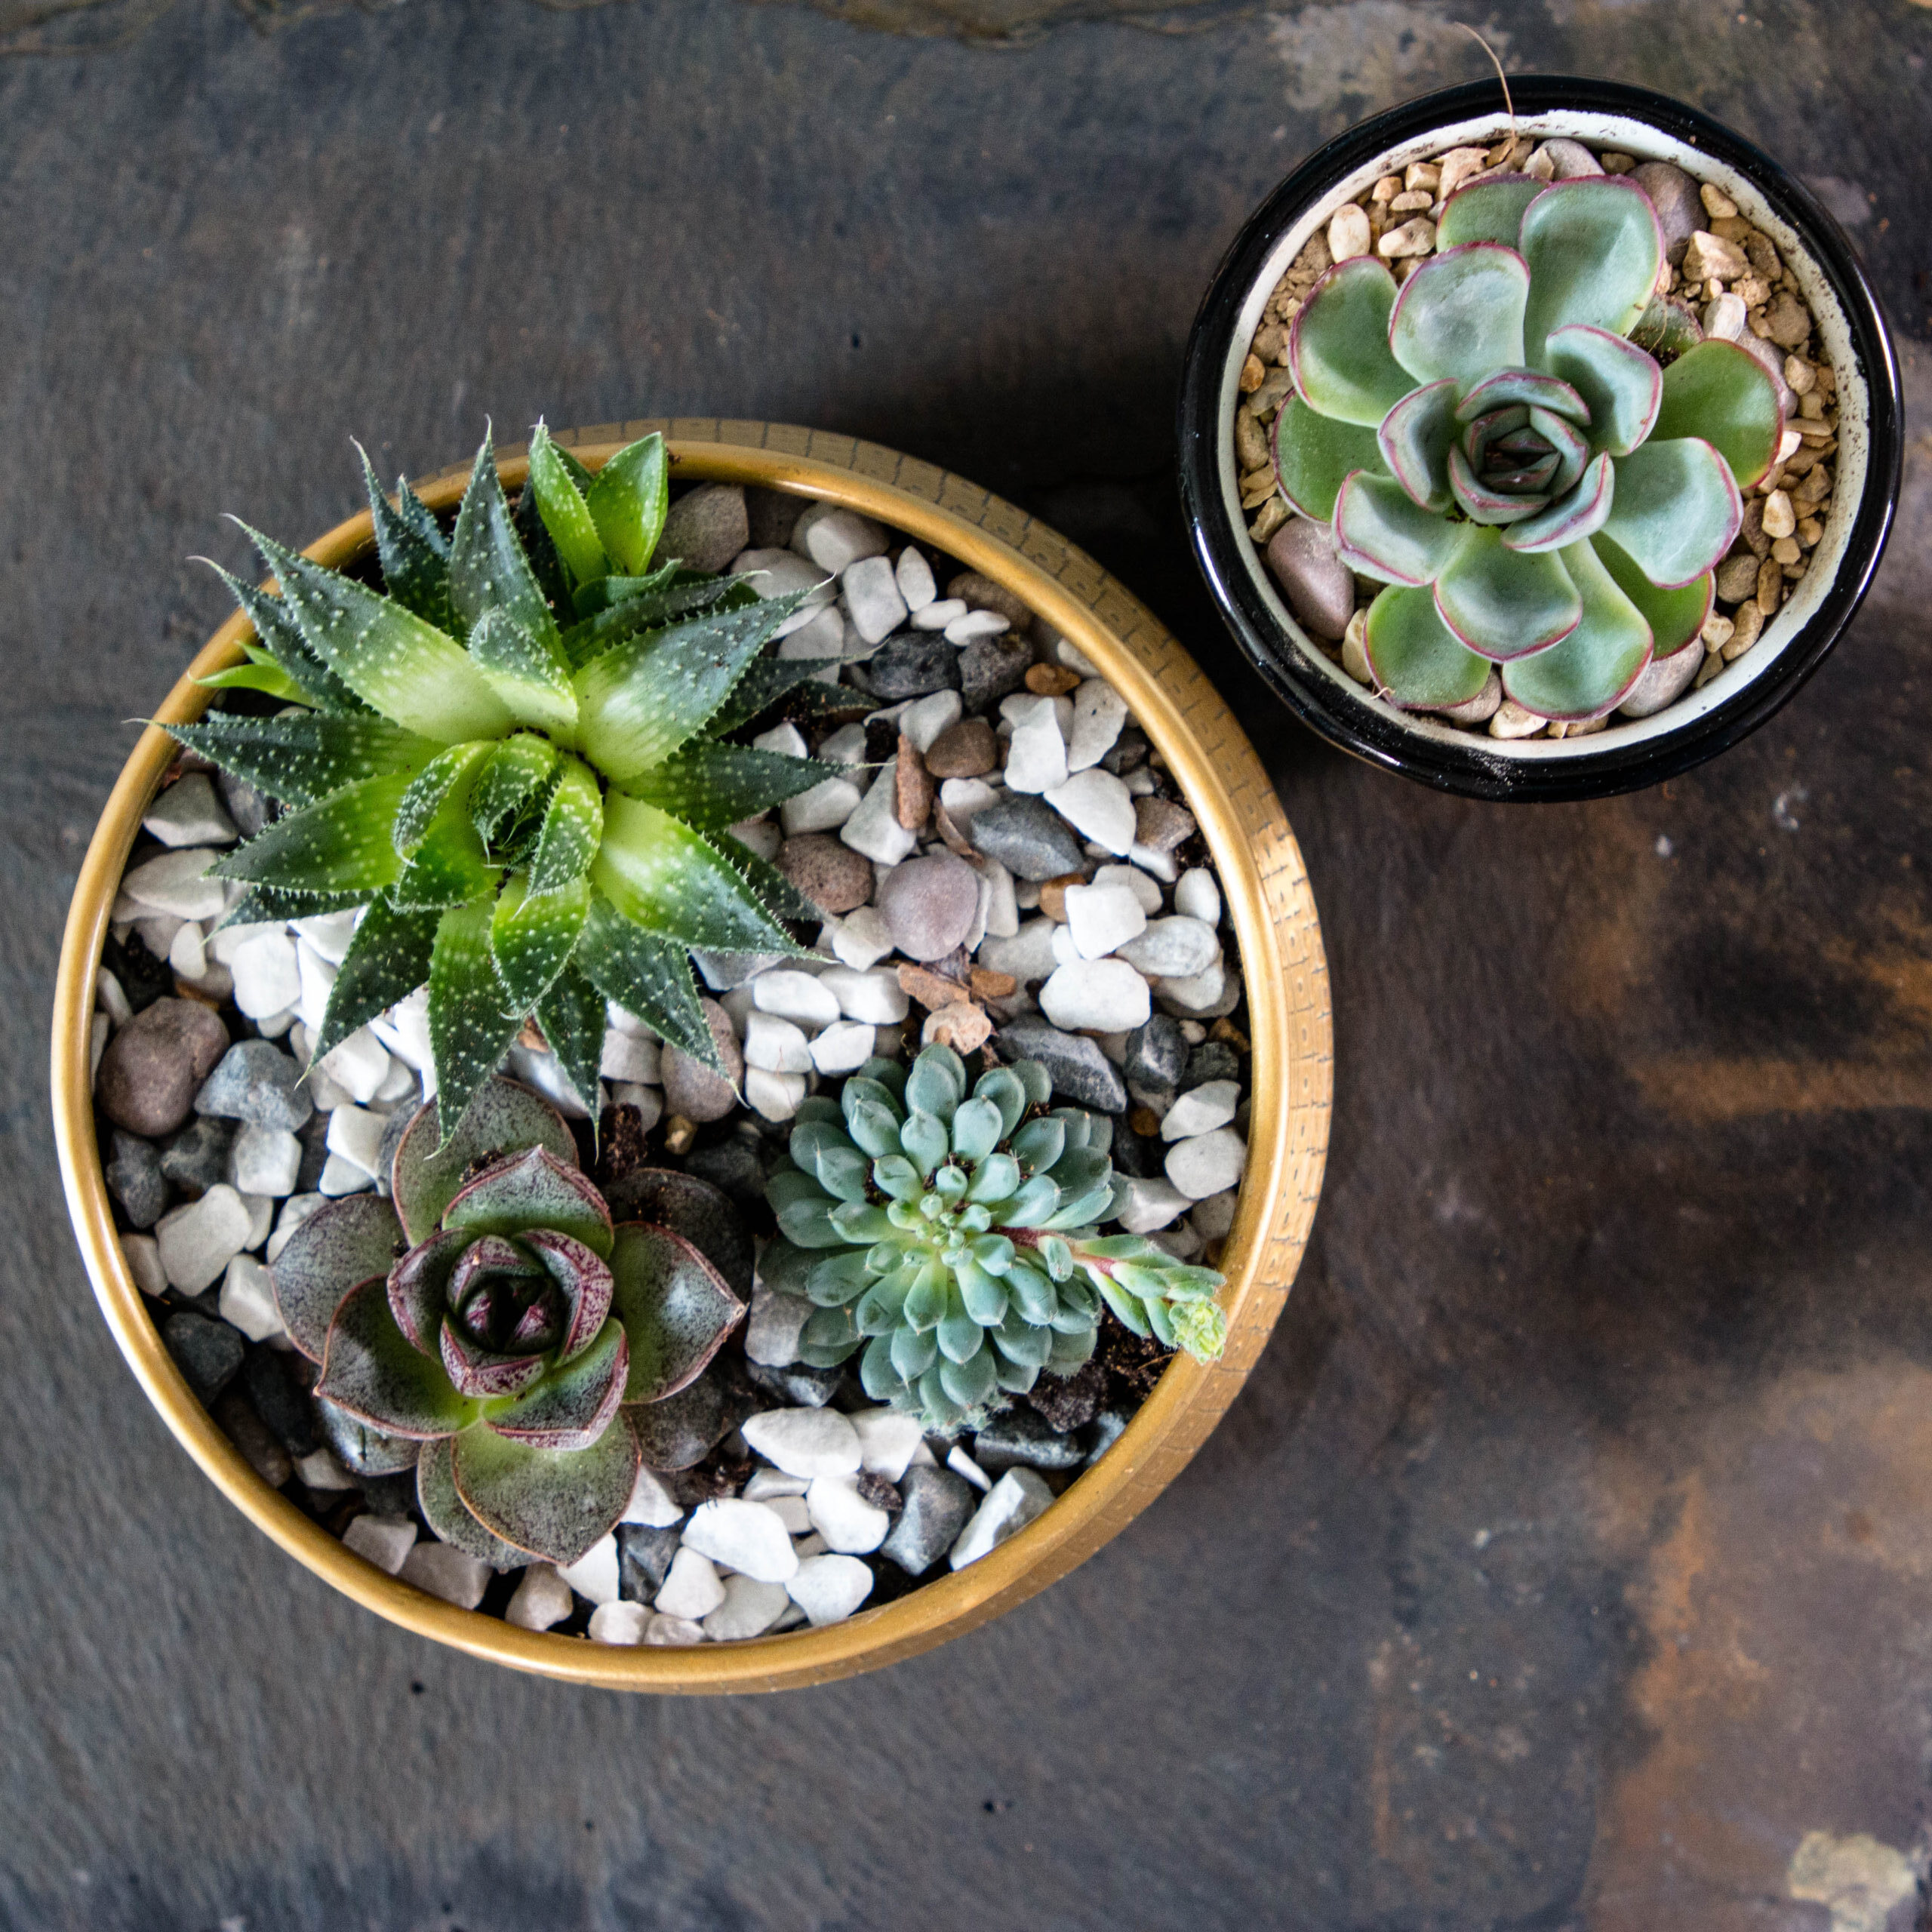 Image features 2 planted planters with succulents with a slate background